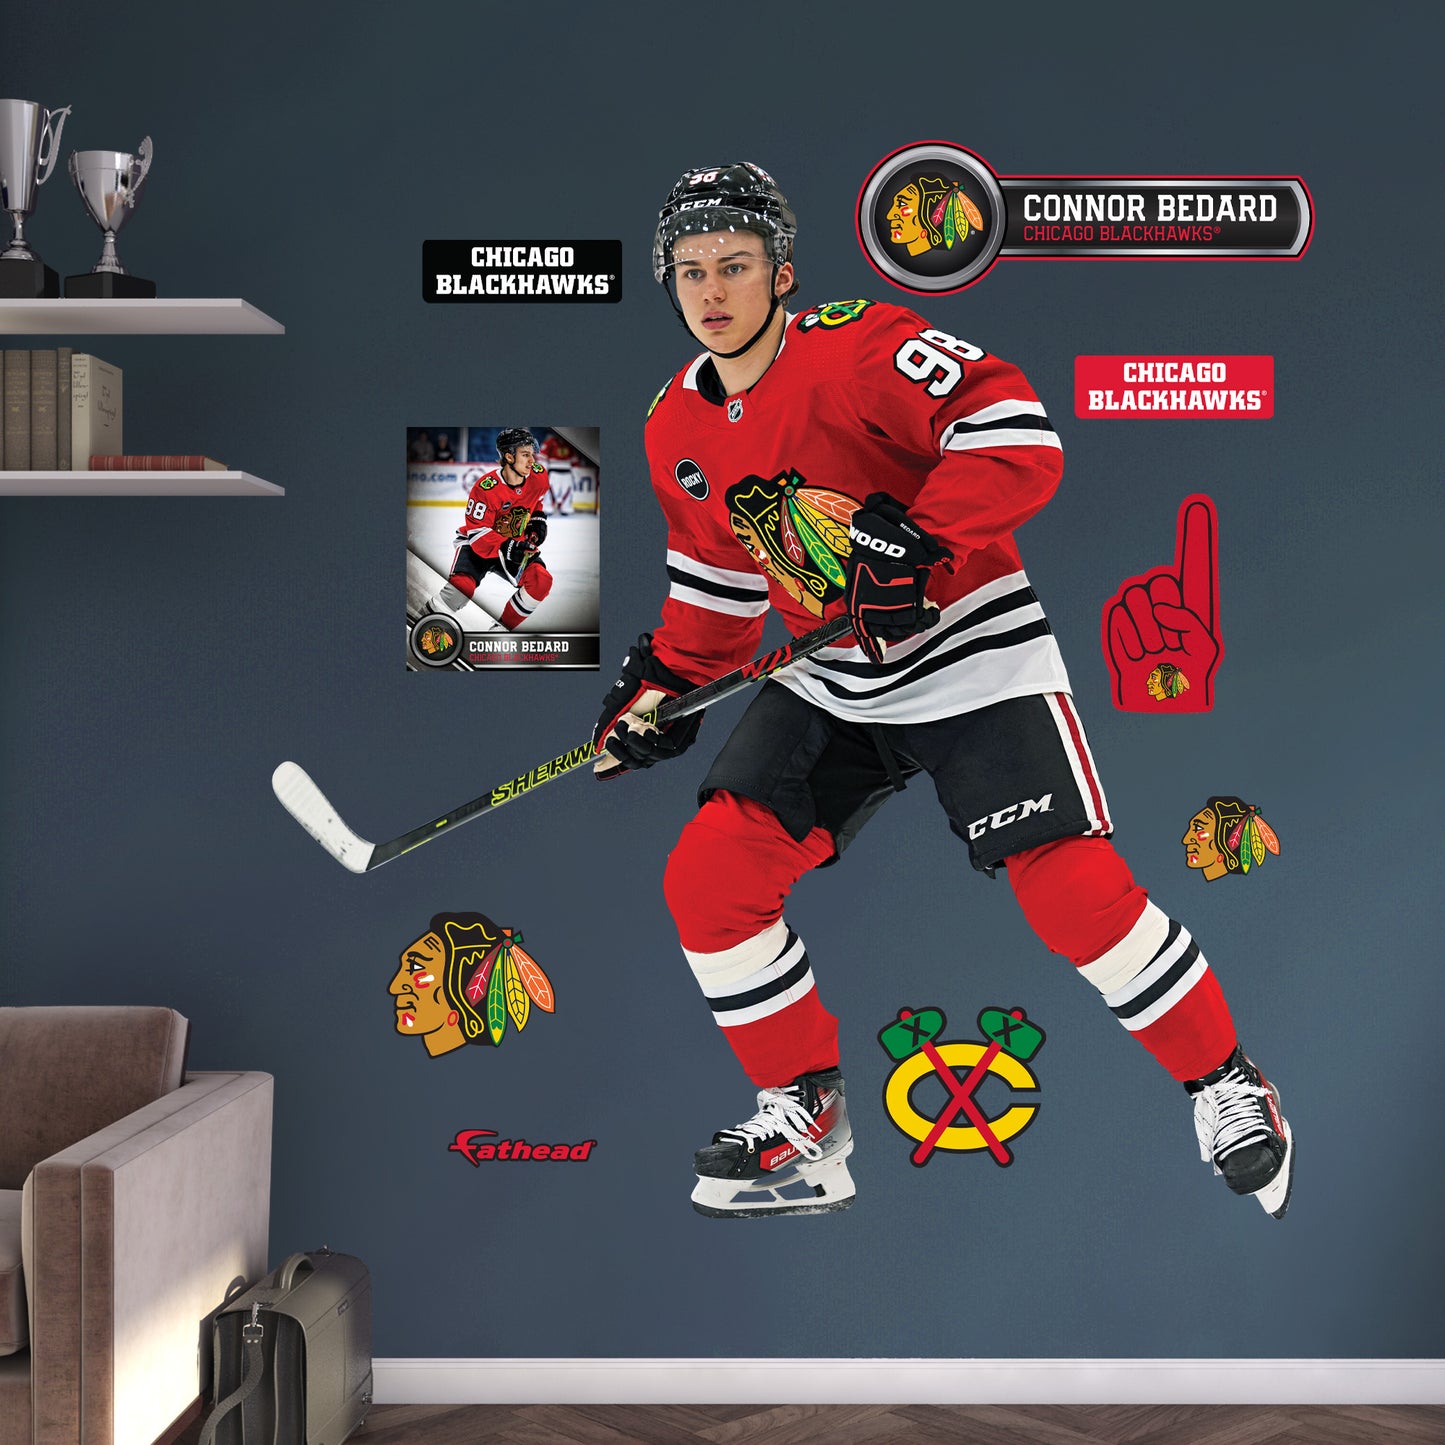 Chicago Blackhawks: Connor Bedard         - Officially Licensed NHL Removable     Adhesive Decal